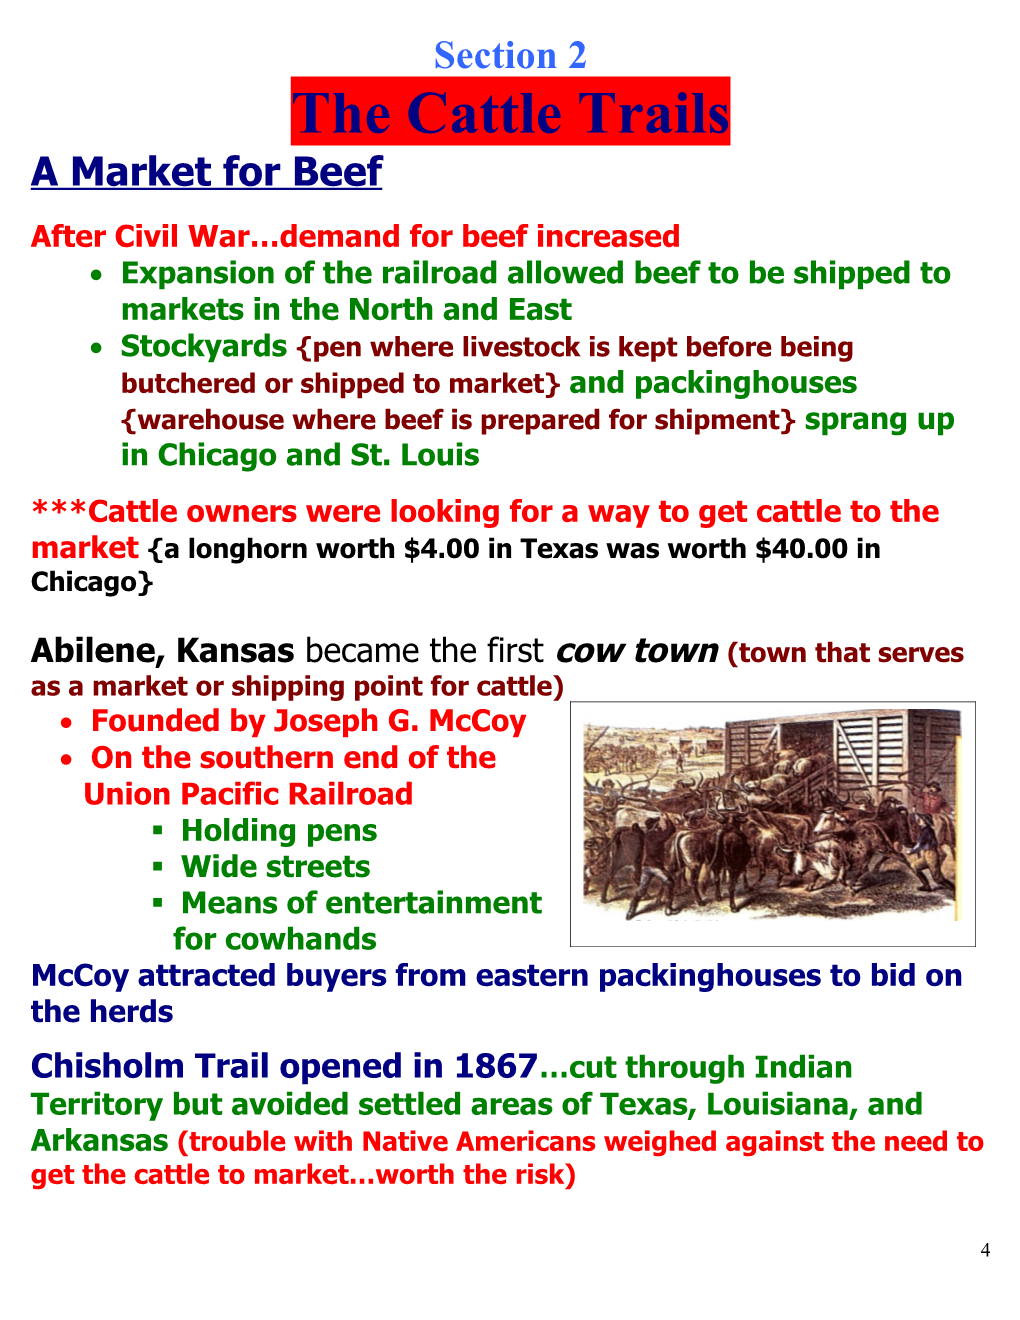 After Civil War Demand for Beef Increased